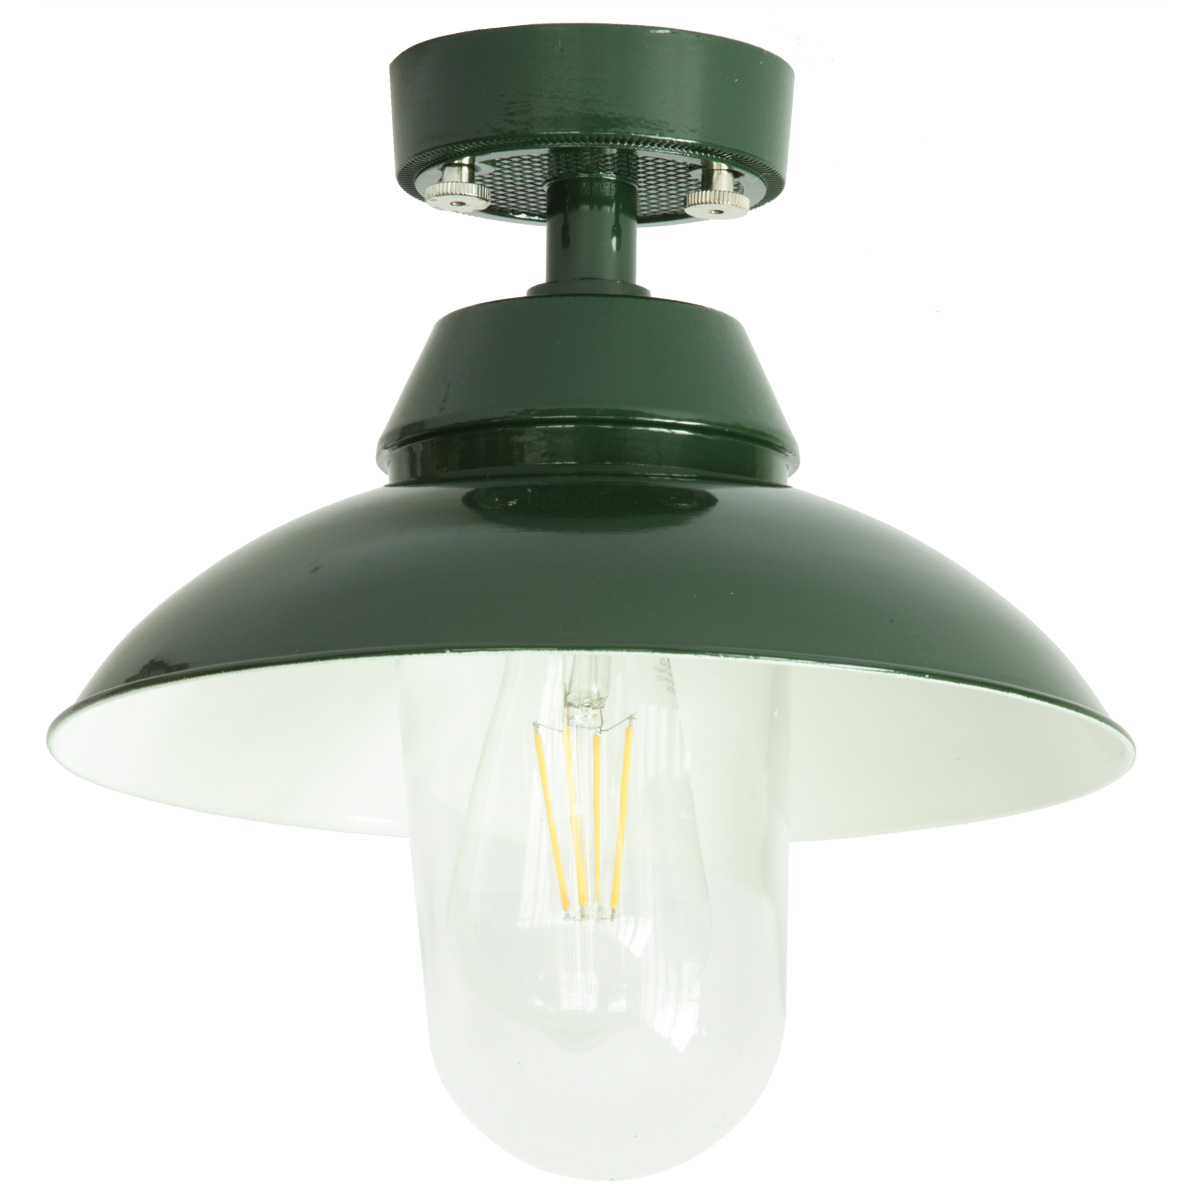 Mainz Zylinder Ceiling Lamp With Screw Glass And Shade O 26